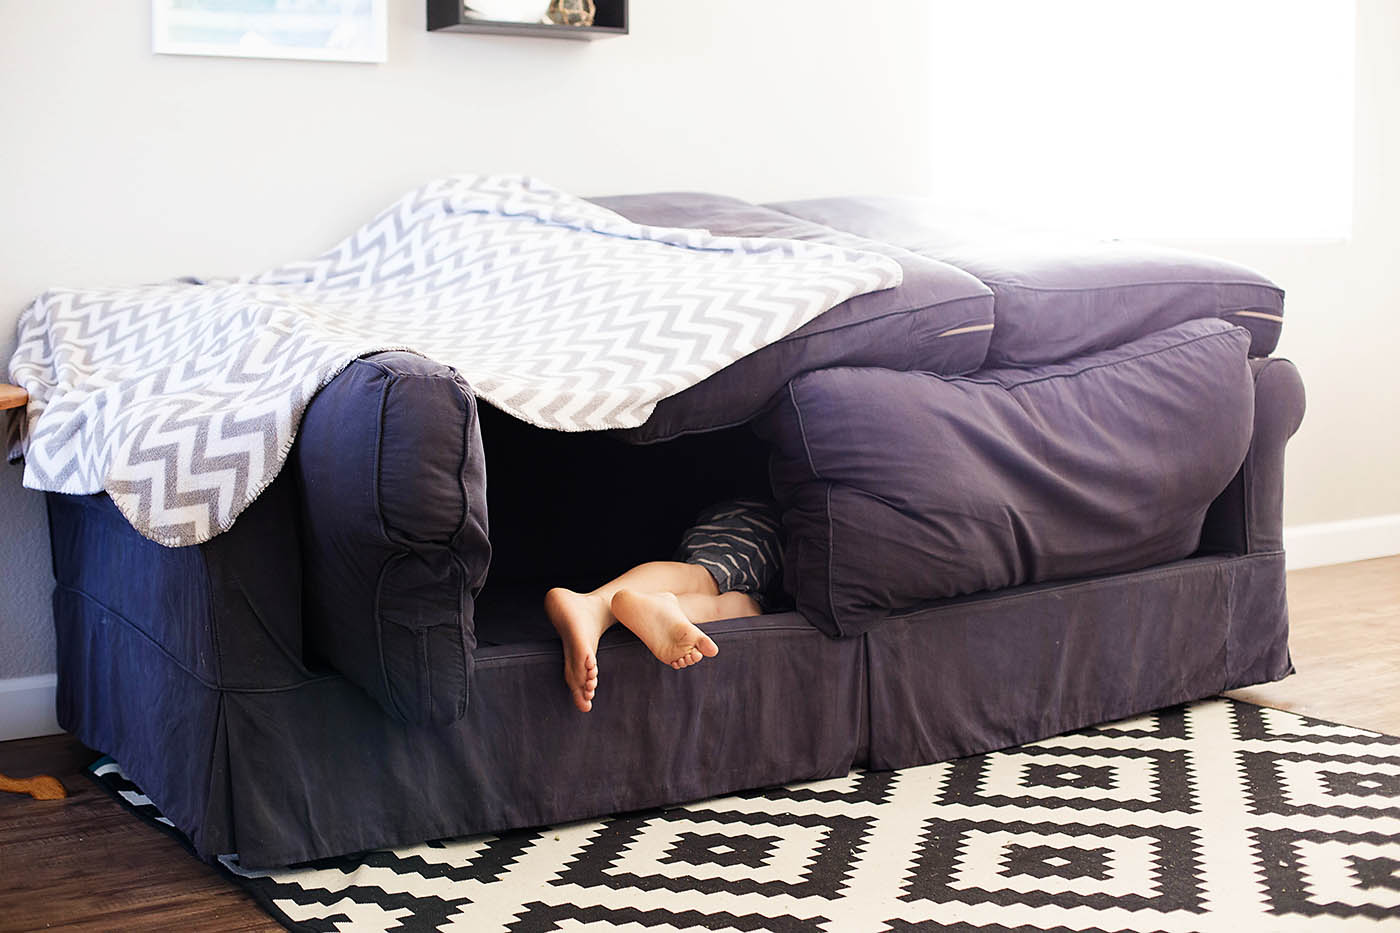 How To Build A Fort With Couch Cushions